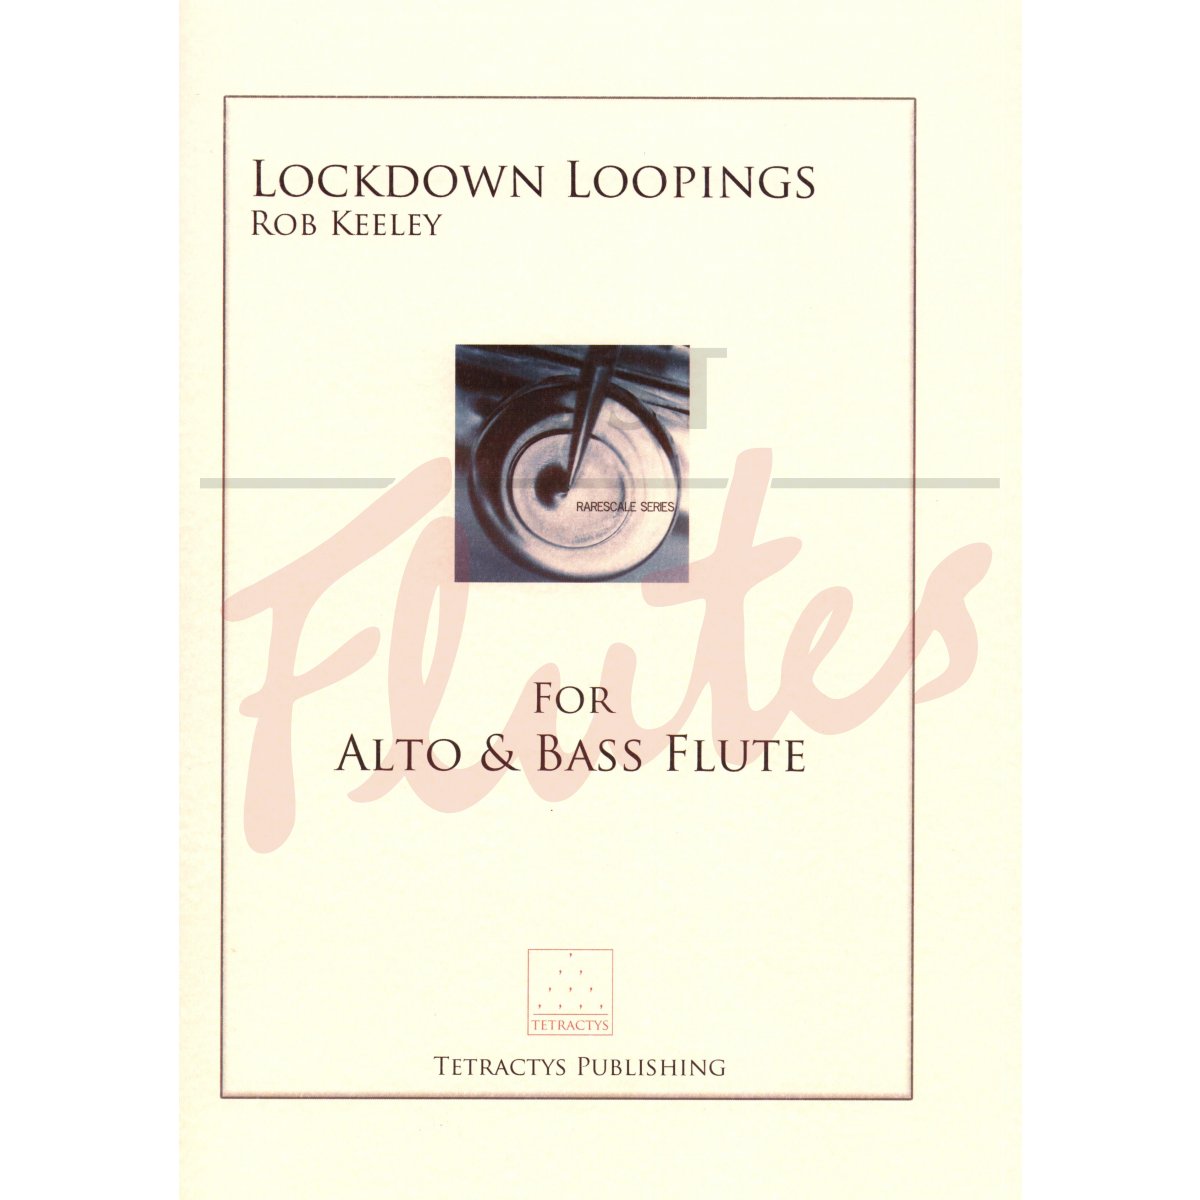 Lockdown Loopings for Alto and Bass Flute